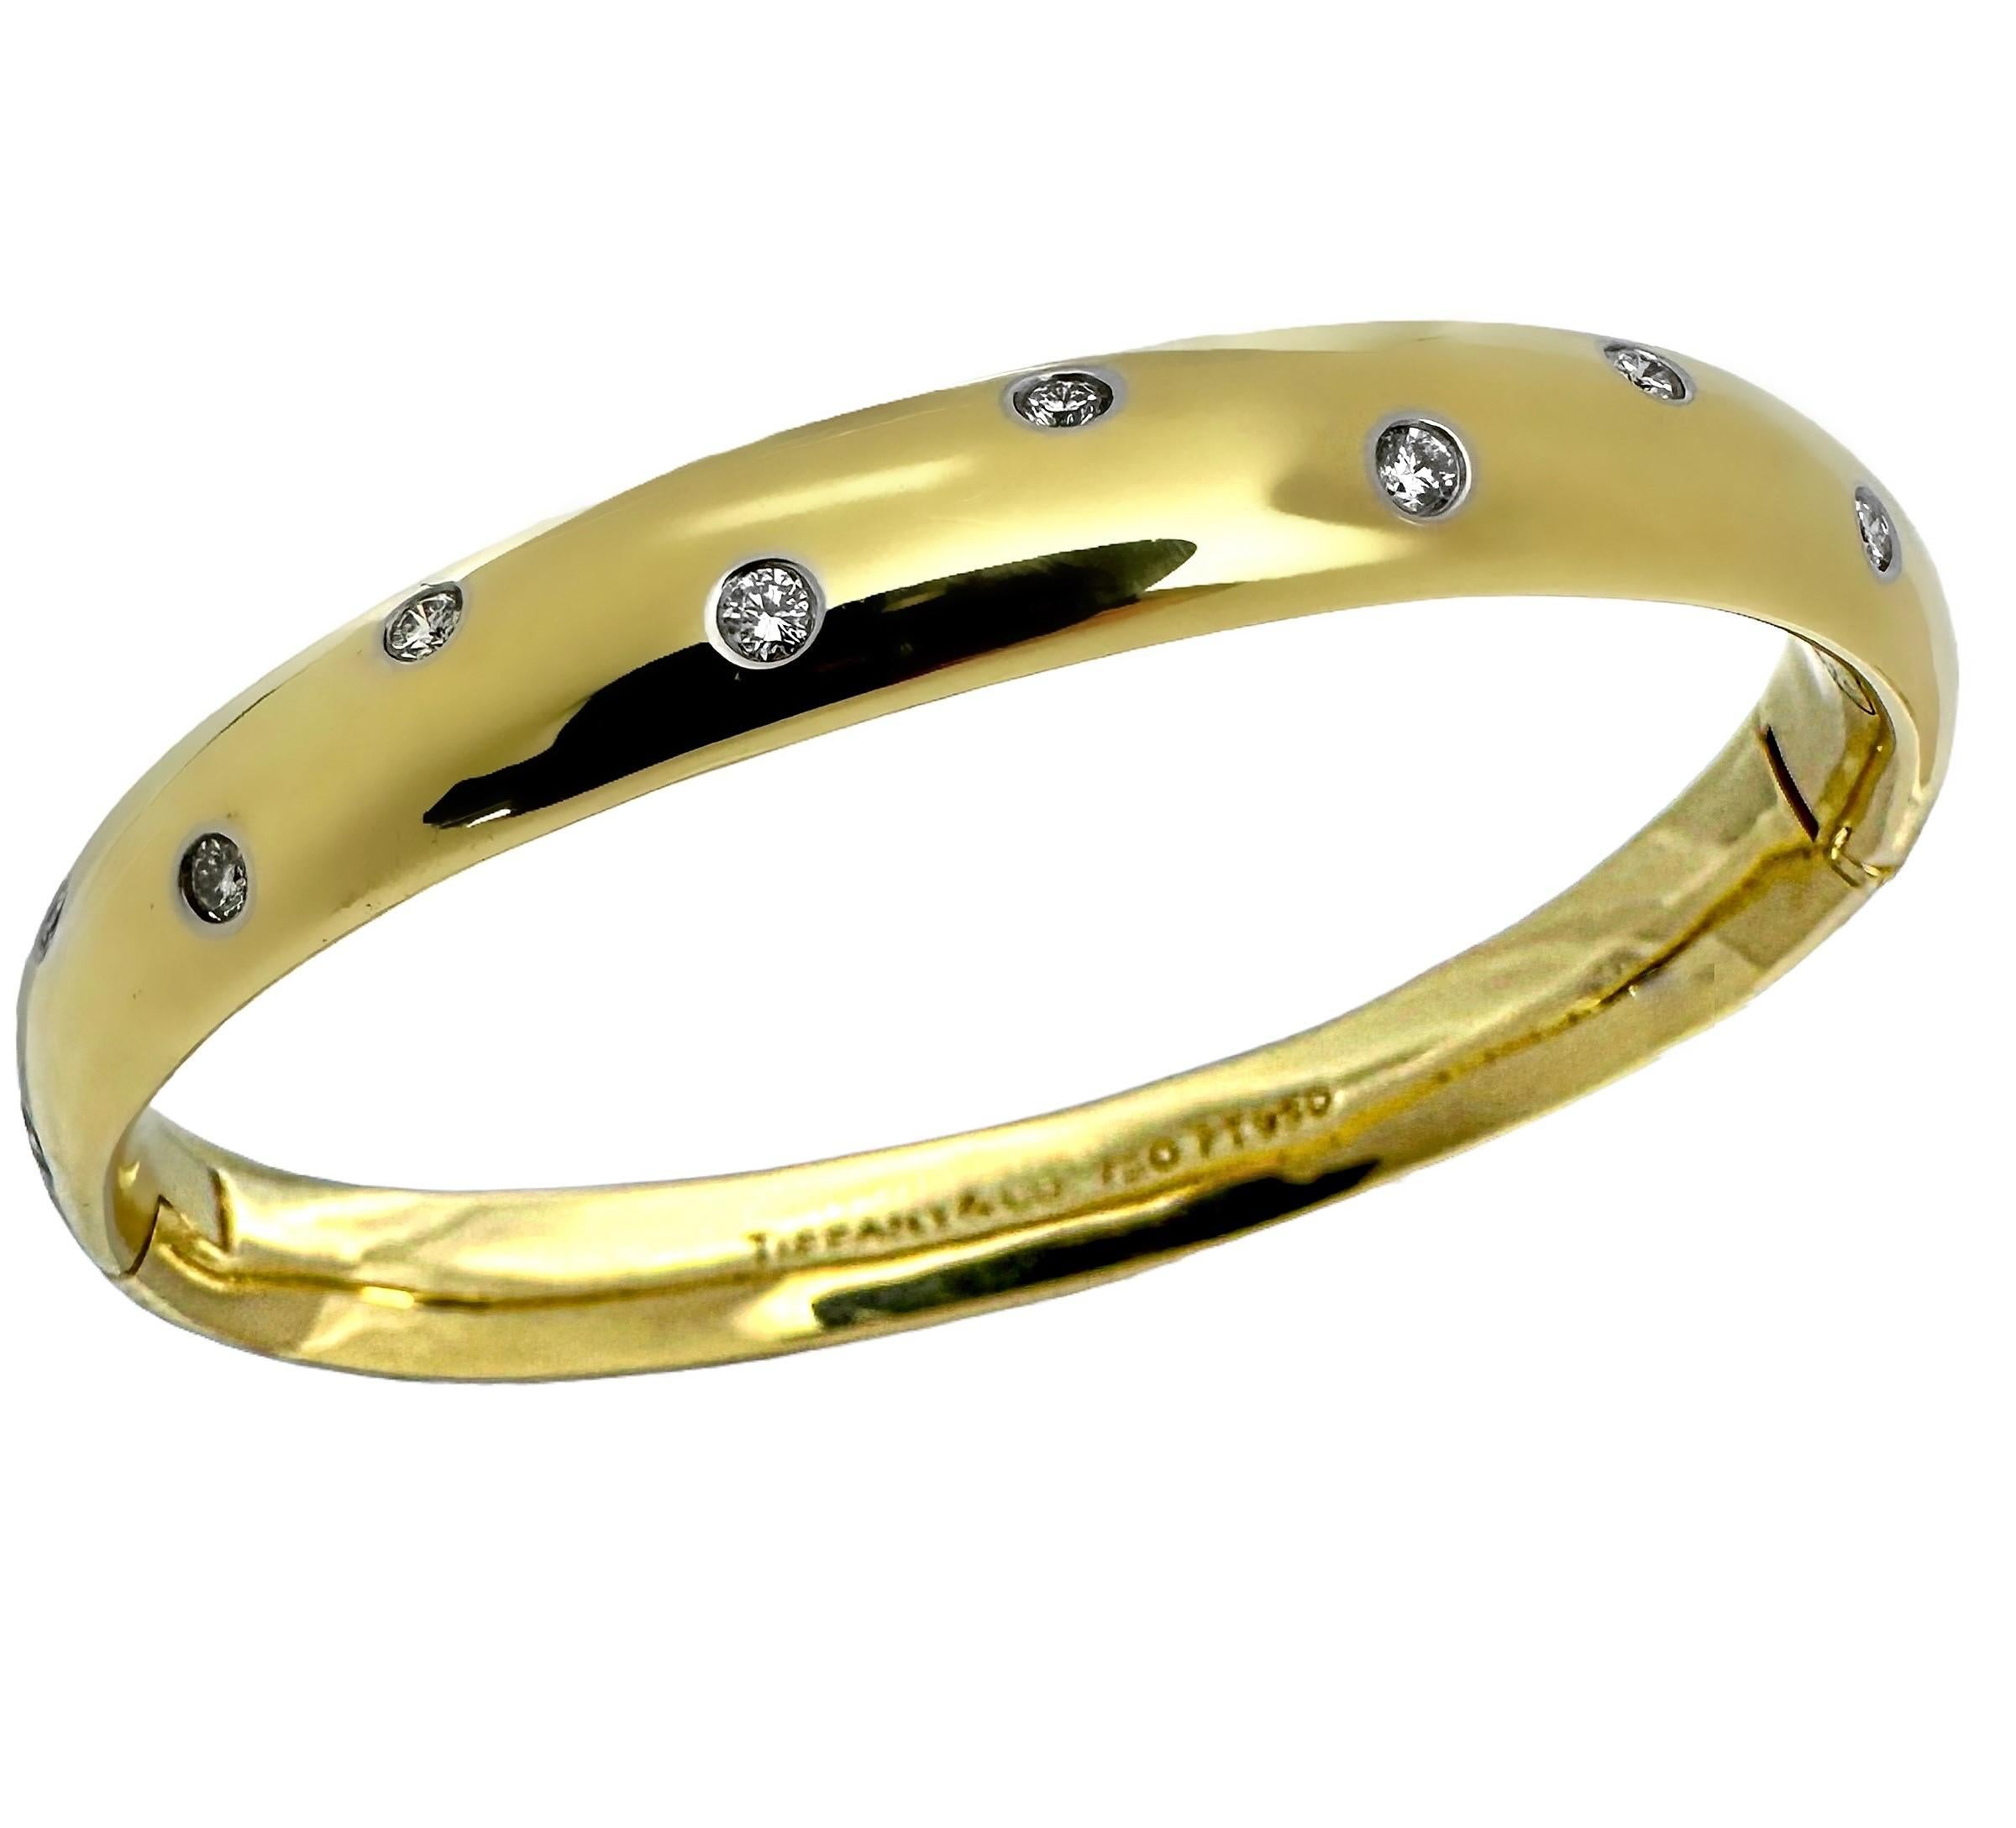 This stunning and instantly recognizable Tiffany & Co. 18K yellow gold and platinum Etoile hinged bangle bracelet is fabricated in the finest manner, befitting the venerated maker. The front is punctuated by ten brilliant cut diamonds, each set in a